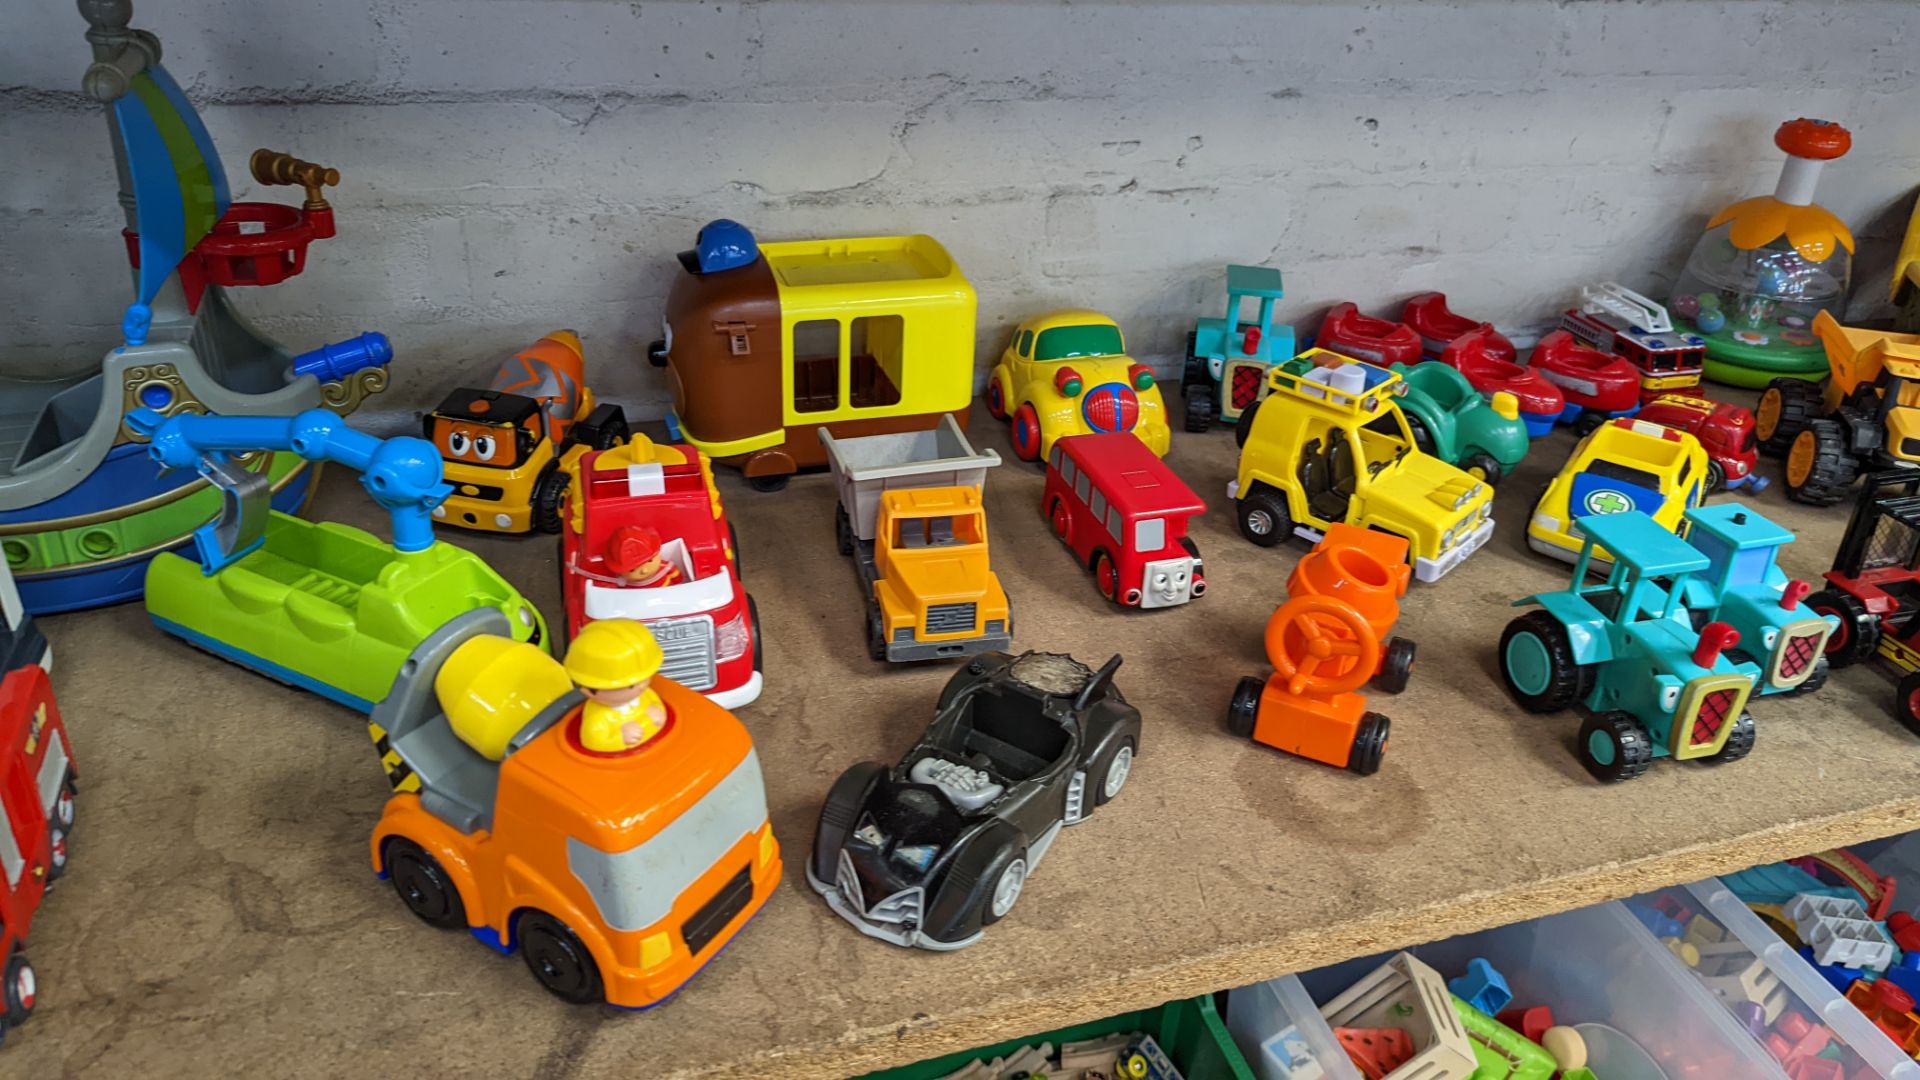 Contents of a bay of assorted children's toys - Image 7 of 10